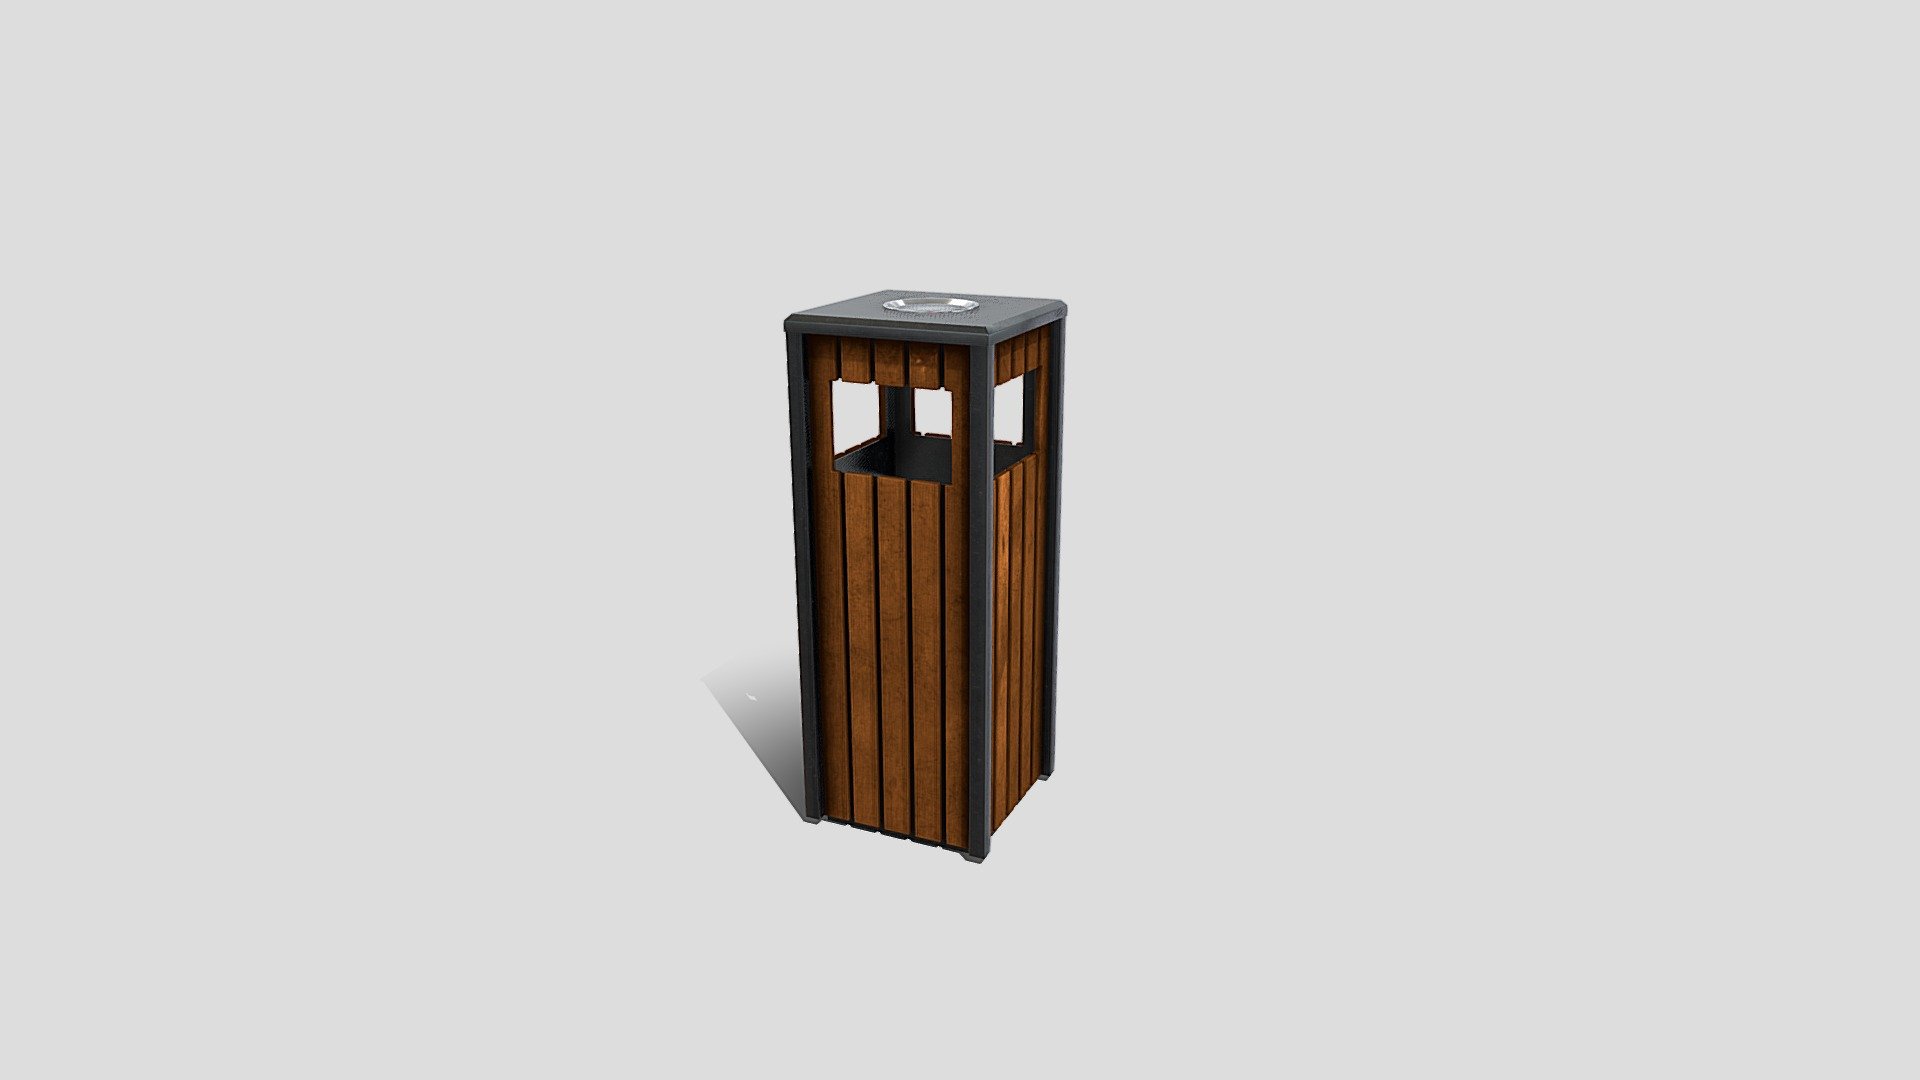 Trash can 3d model rendered with Cycles in Blender, as per seen on attached images. 

File formats:
-.blend, rendered with cycles, as seen in the images;
-.obj, with materials applied;
-.dae, with materials applied;
-.fbx, with materials applied;
-.stl;

Files come named appropriately and split by file format.

3D Software:
The 3D model was originally created in Blender 3.1 and rendered with Cycles.

Materials and textures:
The models have materials applied in all formats, and are ready to import and render.
Materials are image based using PBR, the model comes with four 4k png image textures.

Preview scenes:
The preview images are rendered in Blender using its built-in render engine &lsquo;Cycles'.
Note that the blend files come directly with the rendering scene included and the render command will generate the exact result as seen in previews.

General:
The models are built mostly out of quads.

For any problems please feel free to contact me.

Don't forget to rate and enjoy! - Trash Can V4 - Buy Royalty Free 3D model by dragosburian 3d model